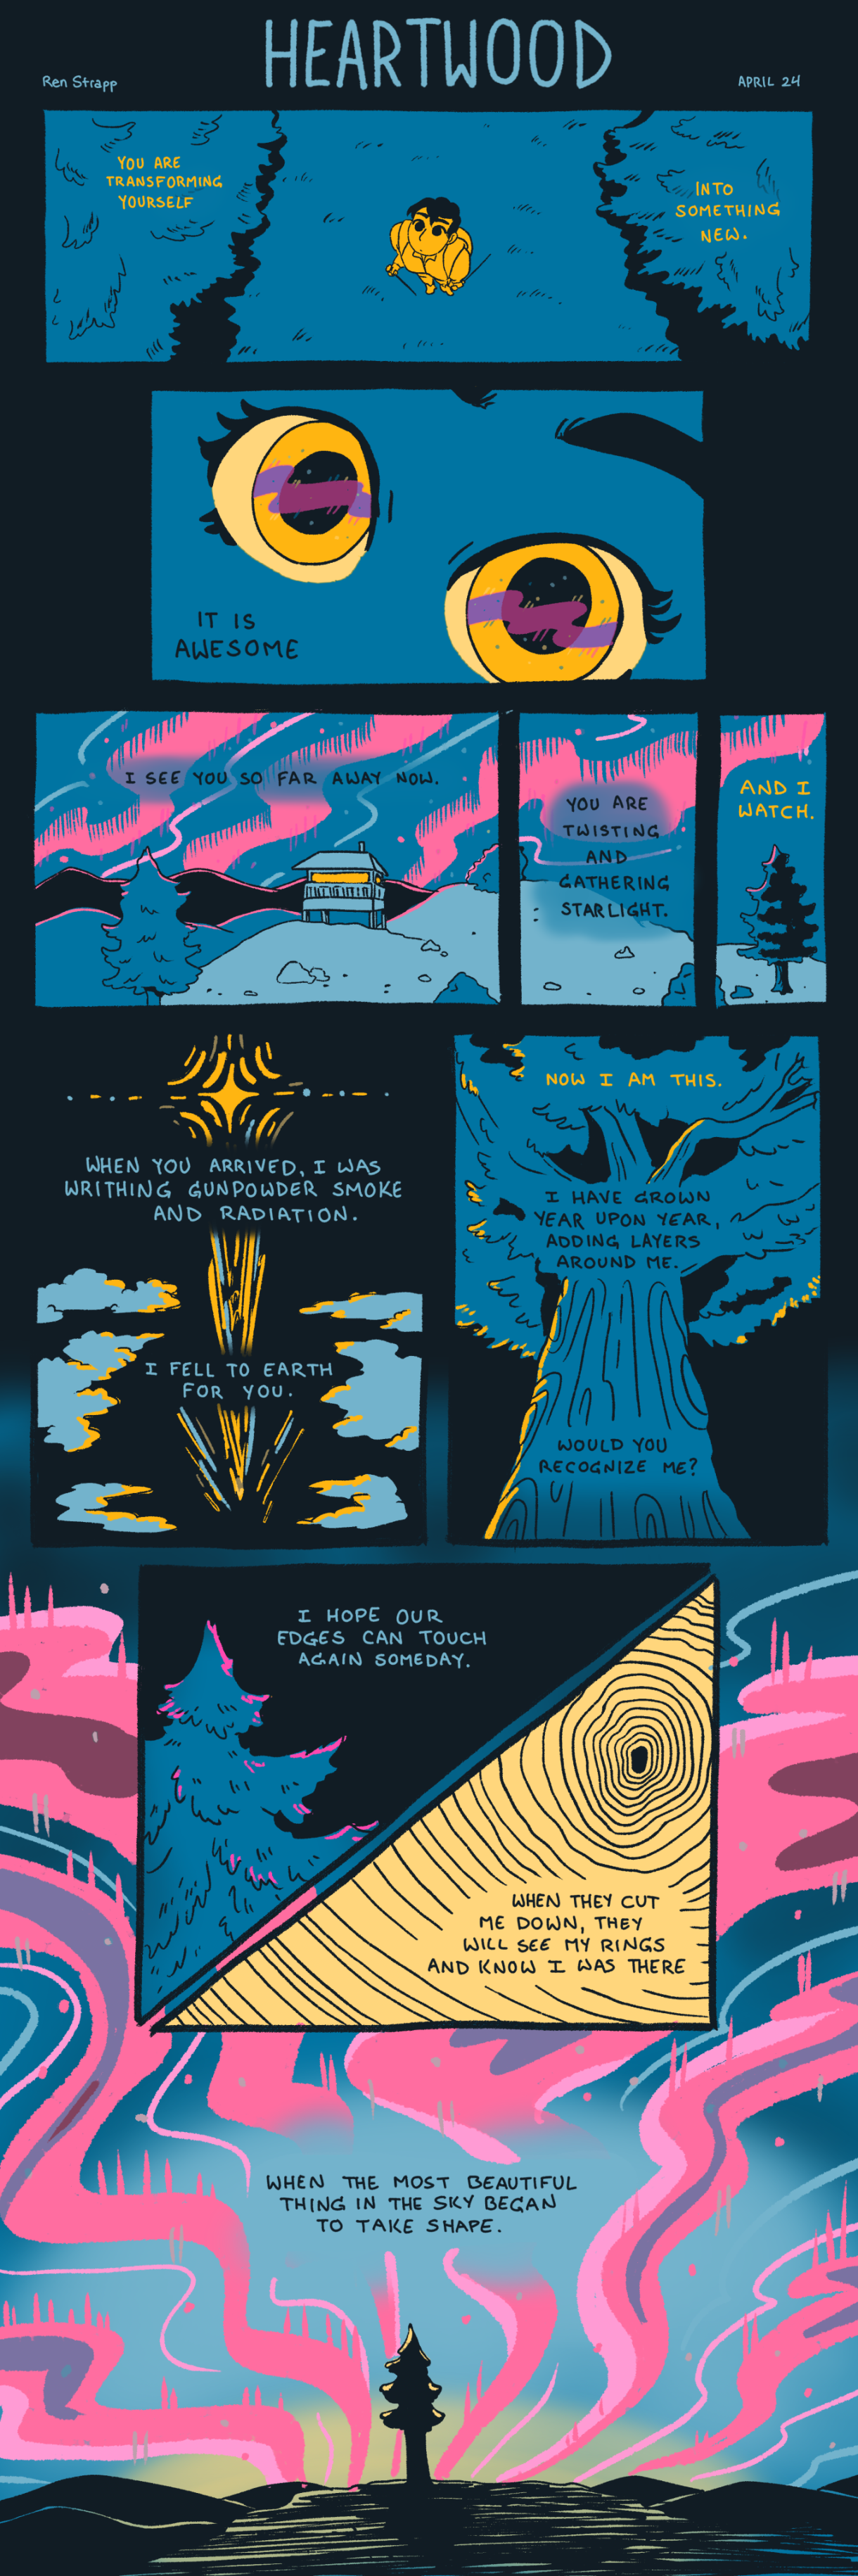 A nine panel comic in colors of blue, yellow and pink show a queer person walking alone at night. The comic is illustrating a poem. The poem reads as follows: "You are transforming yourself/ into something new./ It is awesome. I see you far away now/ you are twisting and gathering starlight / and I watch. / When you arrived, I was writhing in gunpowder, smoke, and radiation. / I fell to the earth for you. /  Now I am this. / I have grown year upon year, adding layers around me. / Would you recognize me? / I hope our edges can touch someday. / When they cut me down, they will see my rings and i know I was there. / When the most beautiful thing in the sky began to take shape."